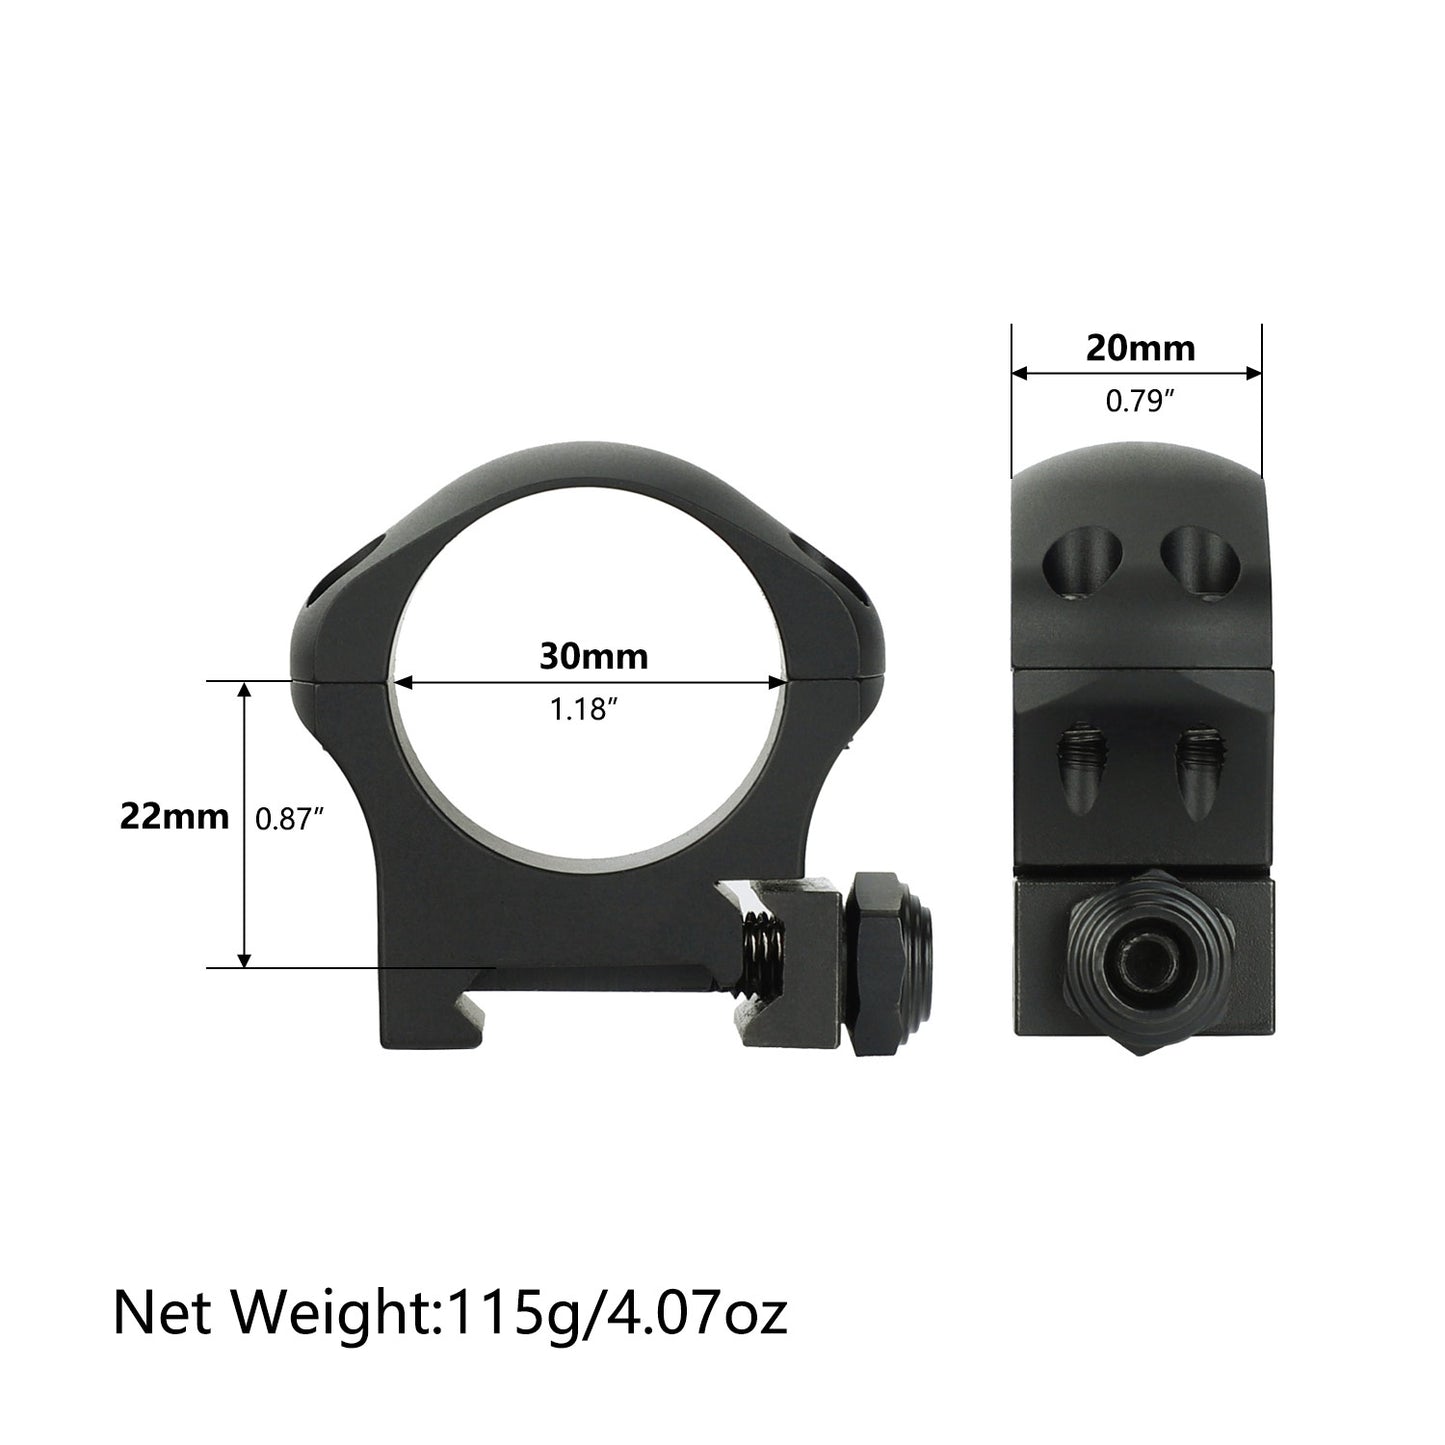 ohhunt® Pro 7075 Aluminum 30mm Scope Rings for Picatinny Rail - Low Profile